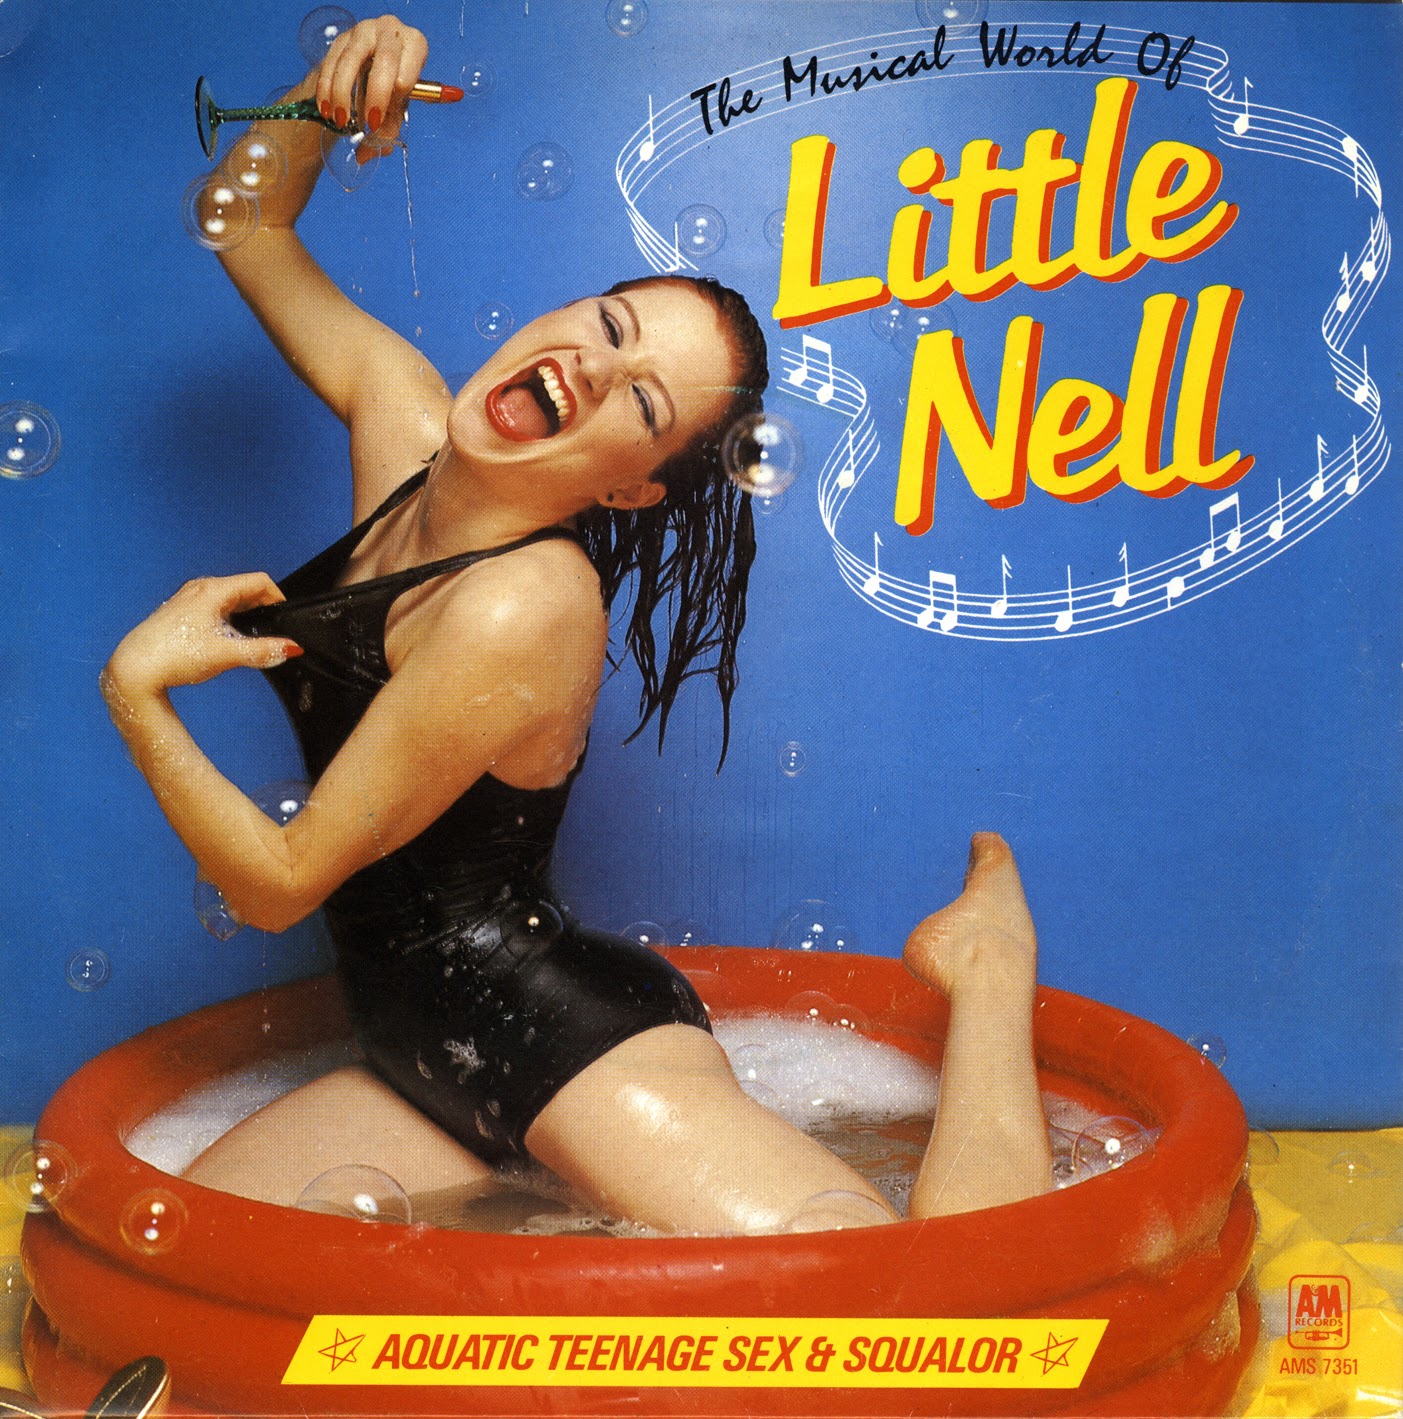 HISTORY OF AUSTRALIAN MUSIC FROM 1960 UNTIL 2000 LITTLE NELL